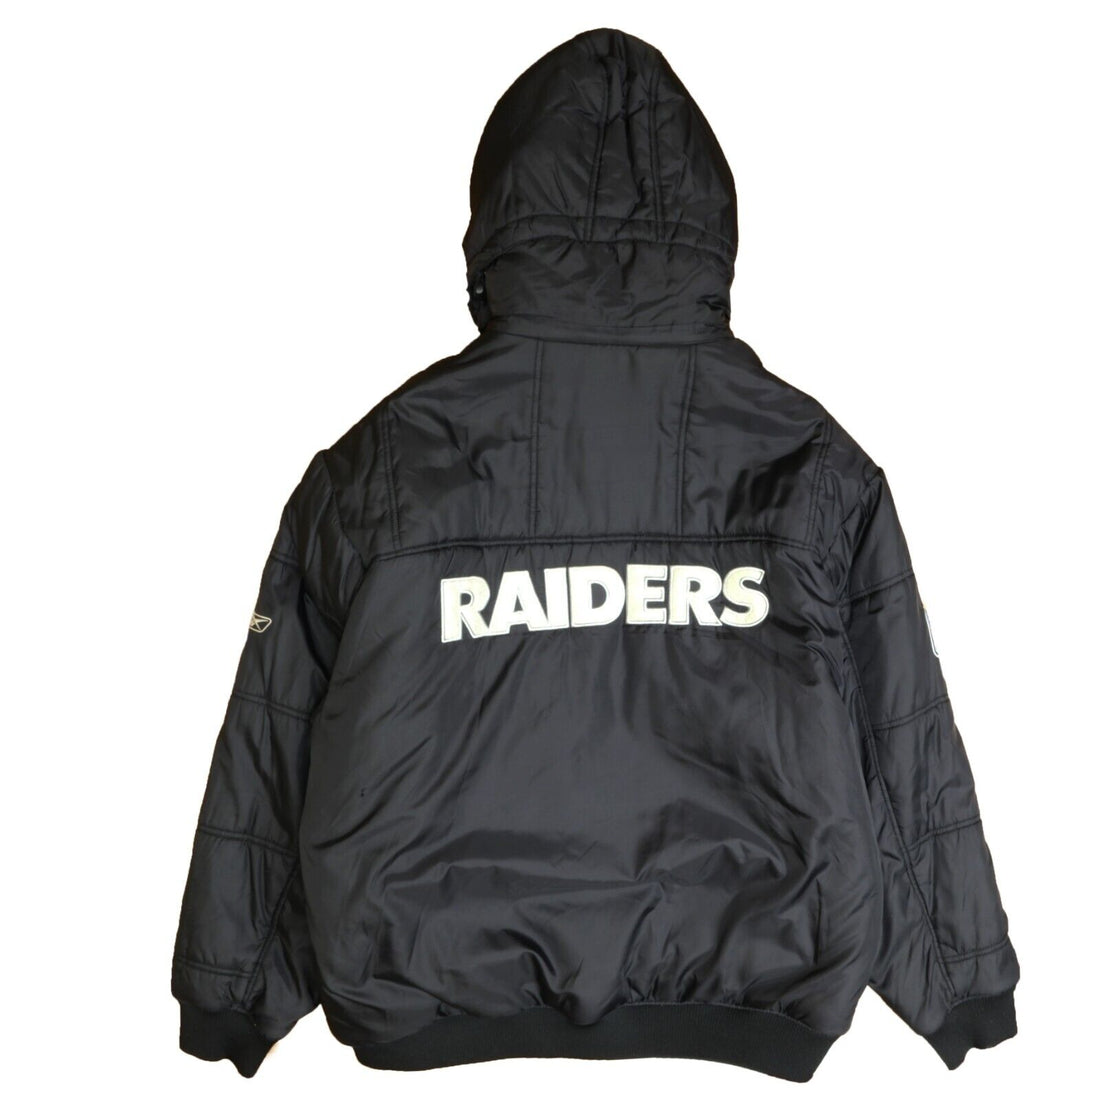 Oakland Raiders Puffer Jacket Size 2XL Black Exclusive Edition NFL